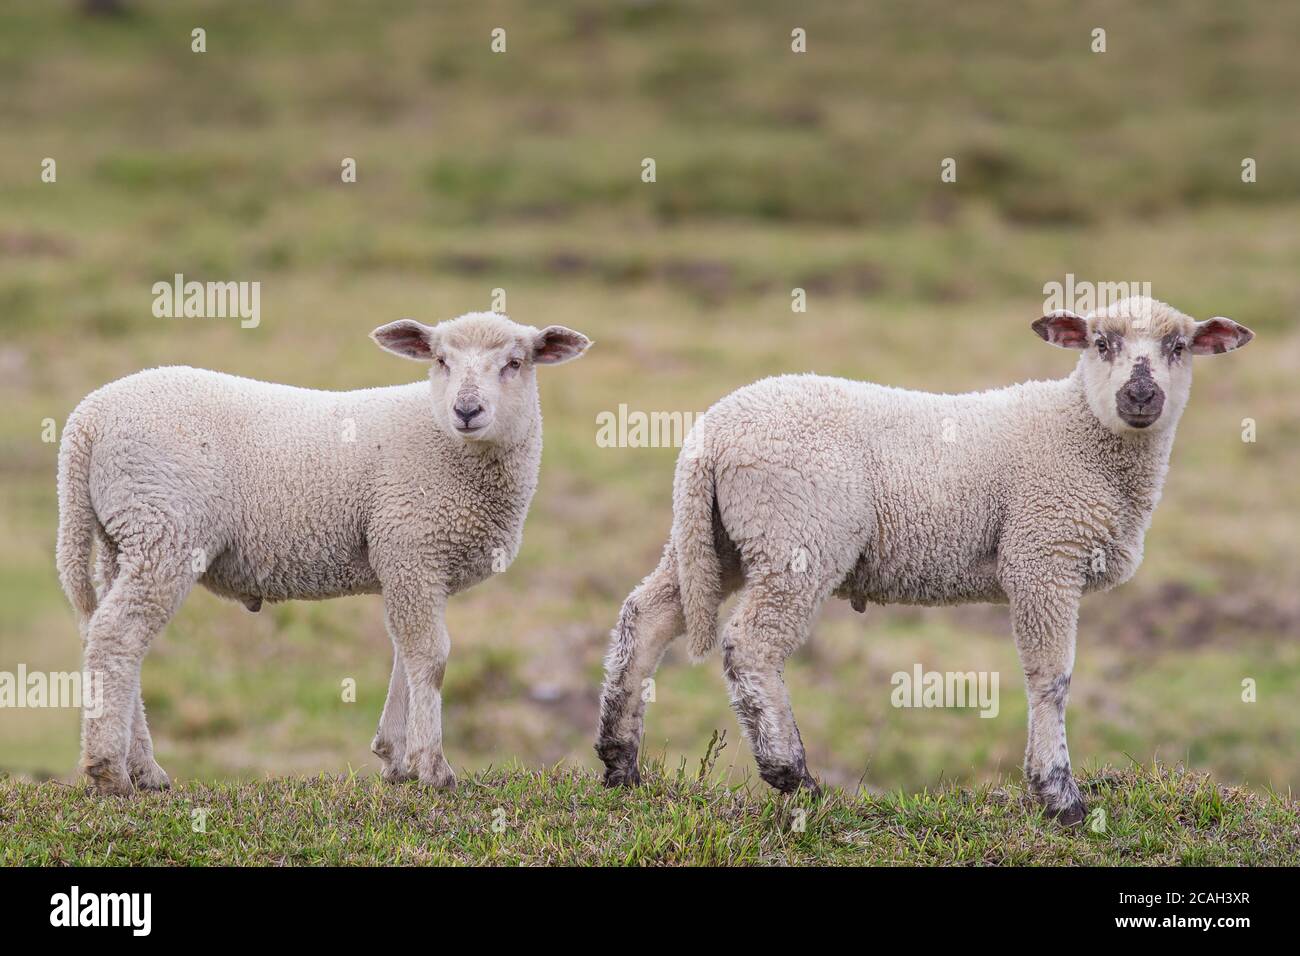 Two little lambs in the pasture Stock Photo